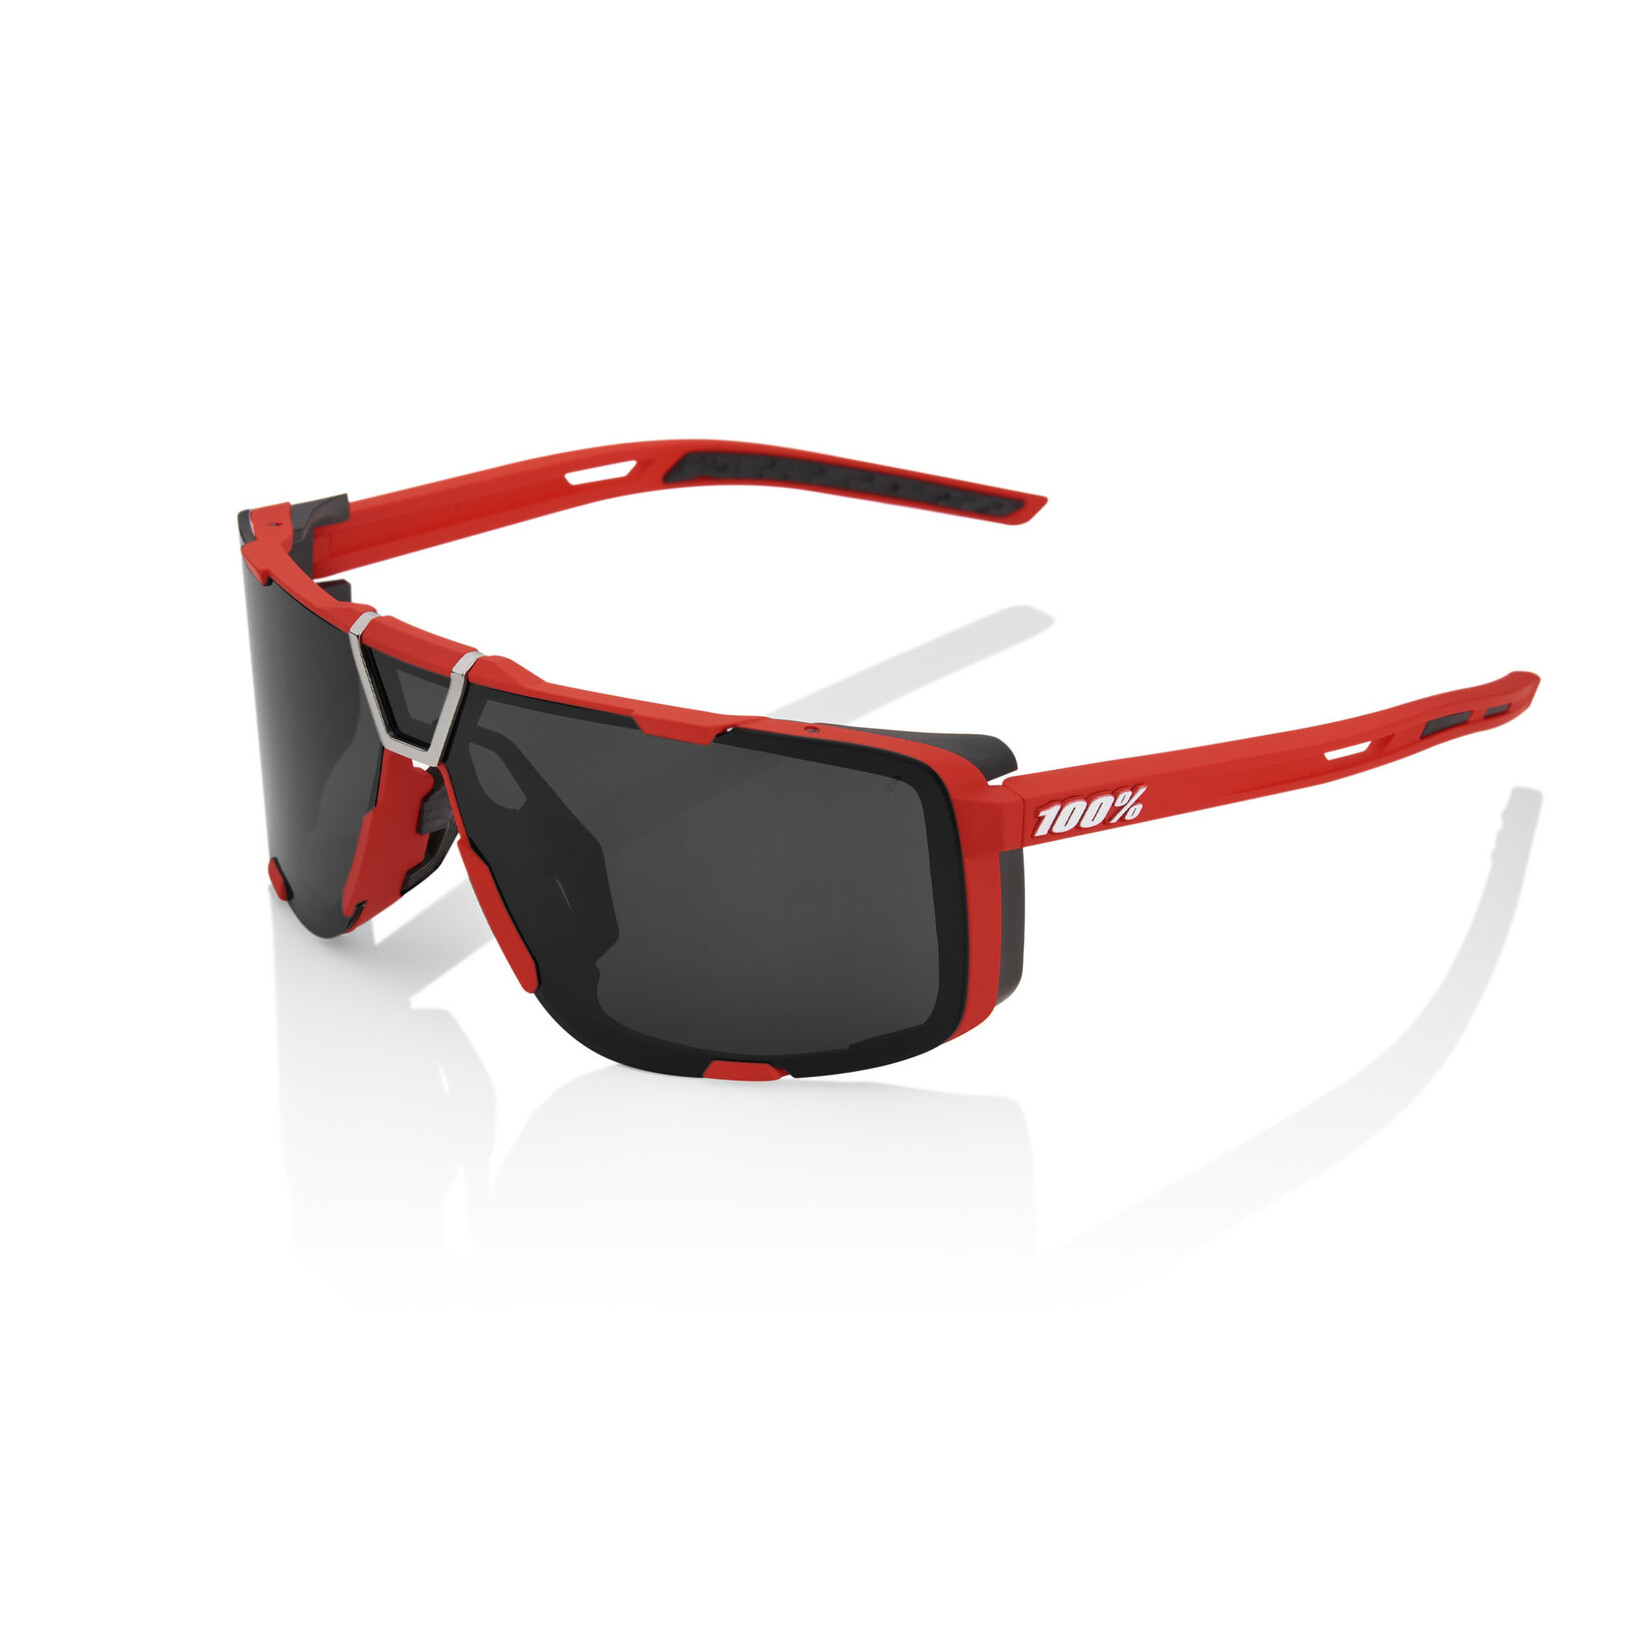 100% Eastcraft Sunglasses, Soft Tact Red frame - Black Mirror Lens